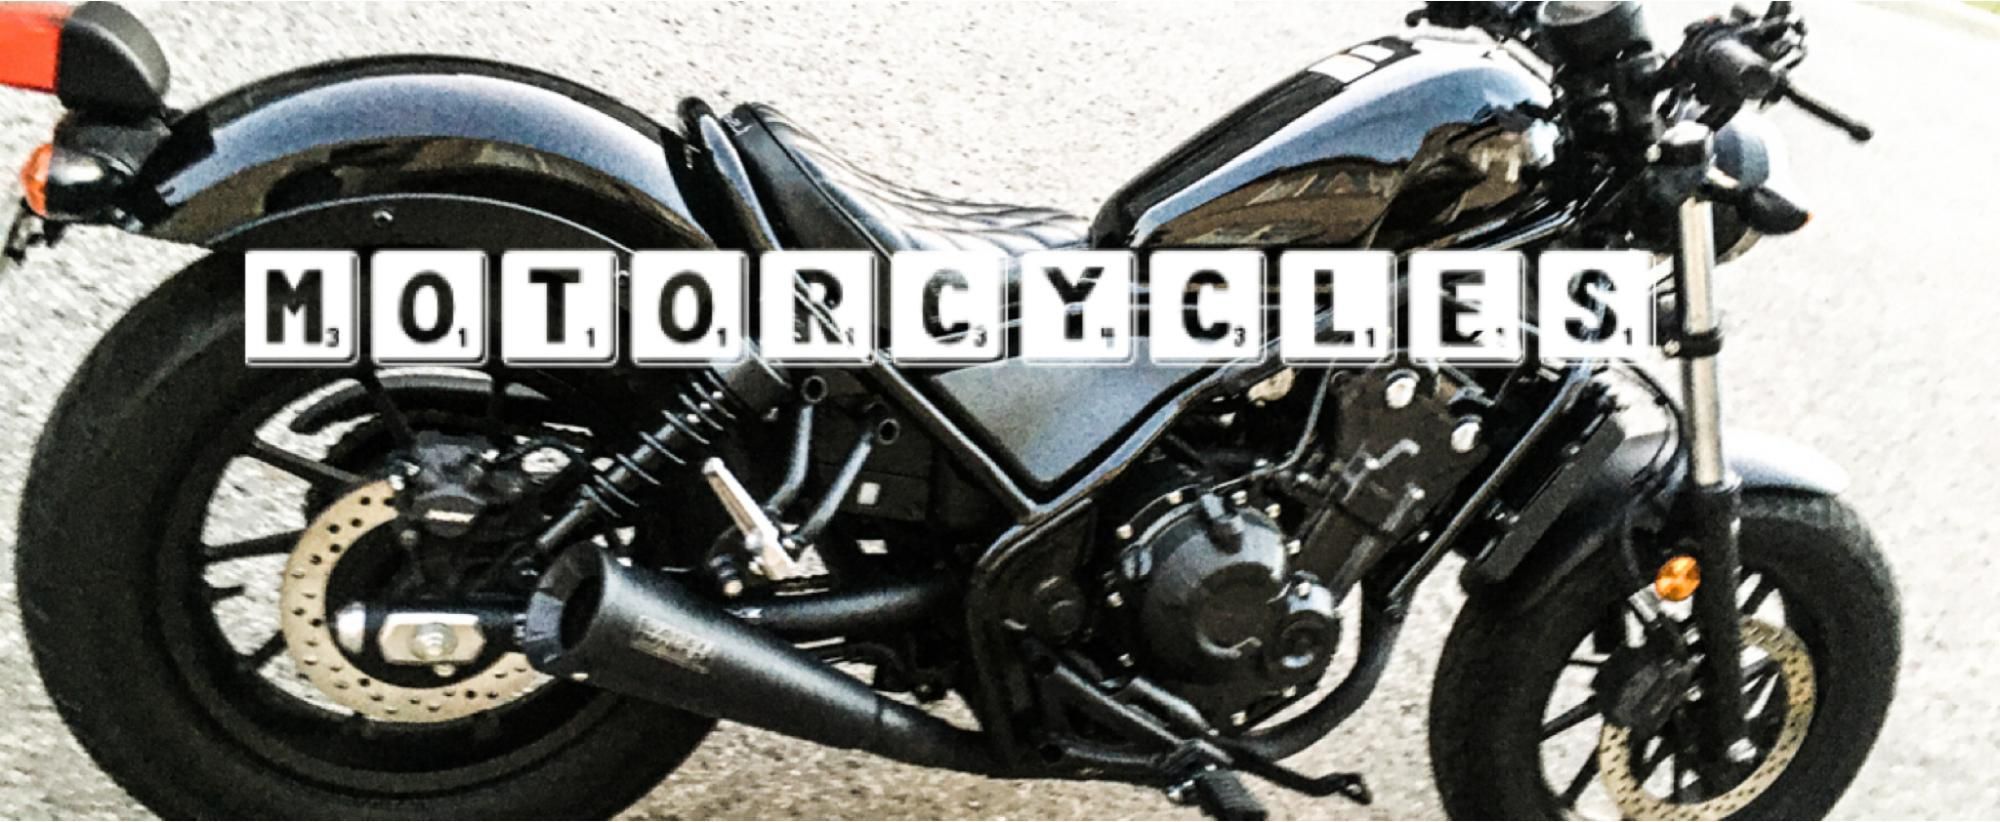 Motorcycles cover photo